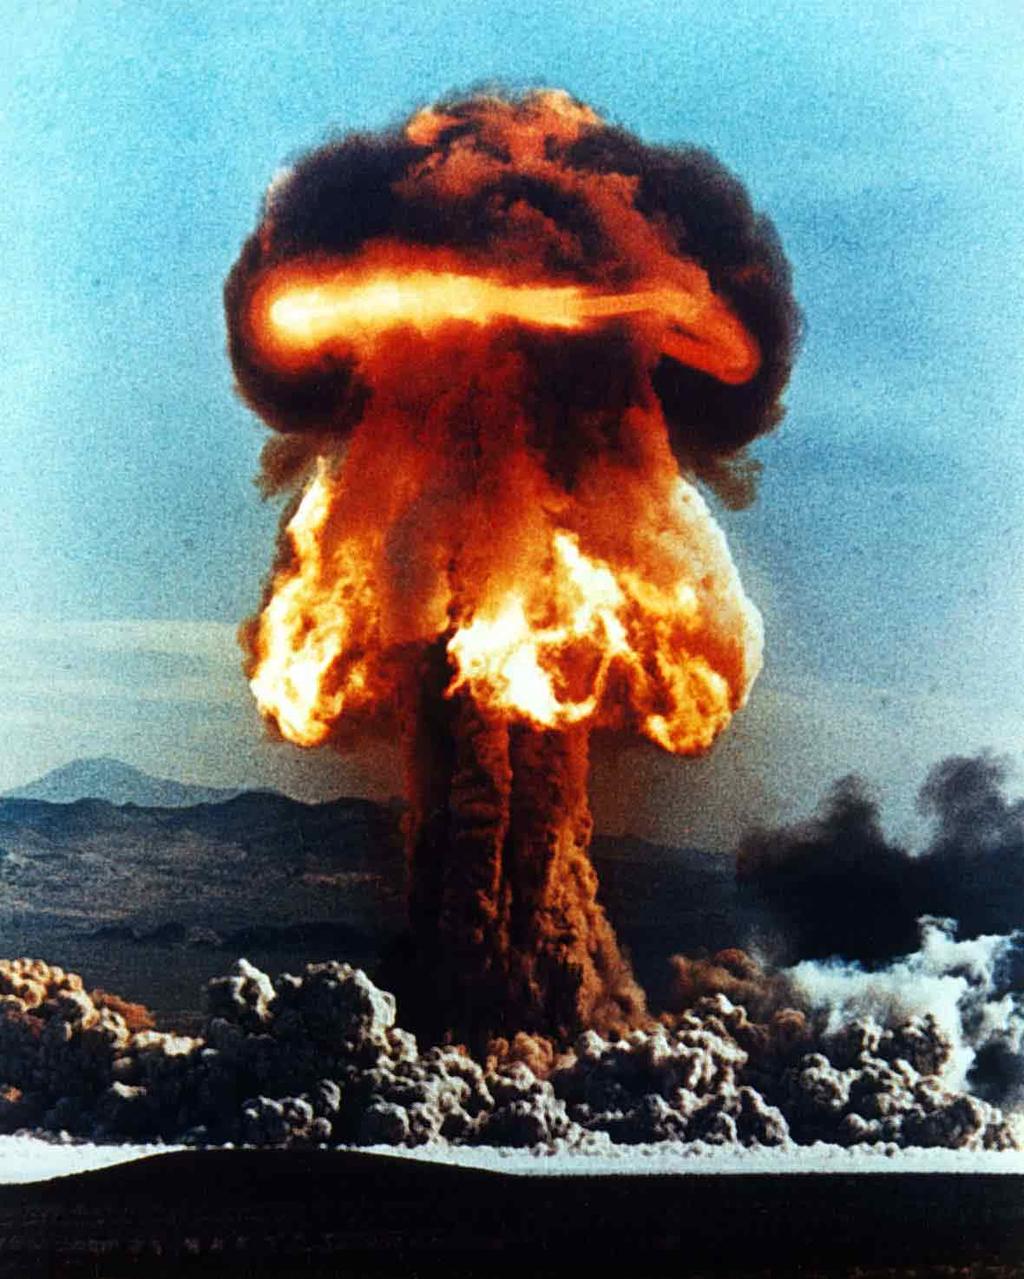 Nuclear Bombs a supercritical reaction very hard to